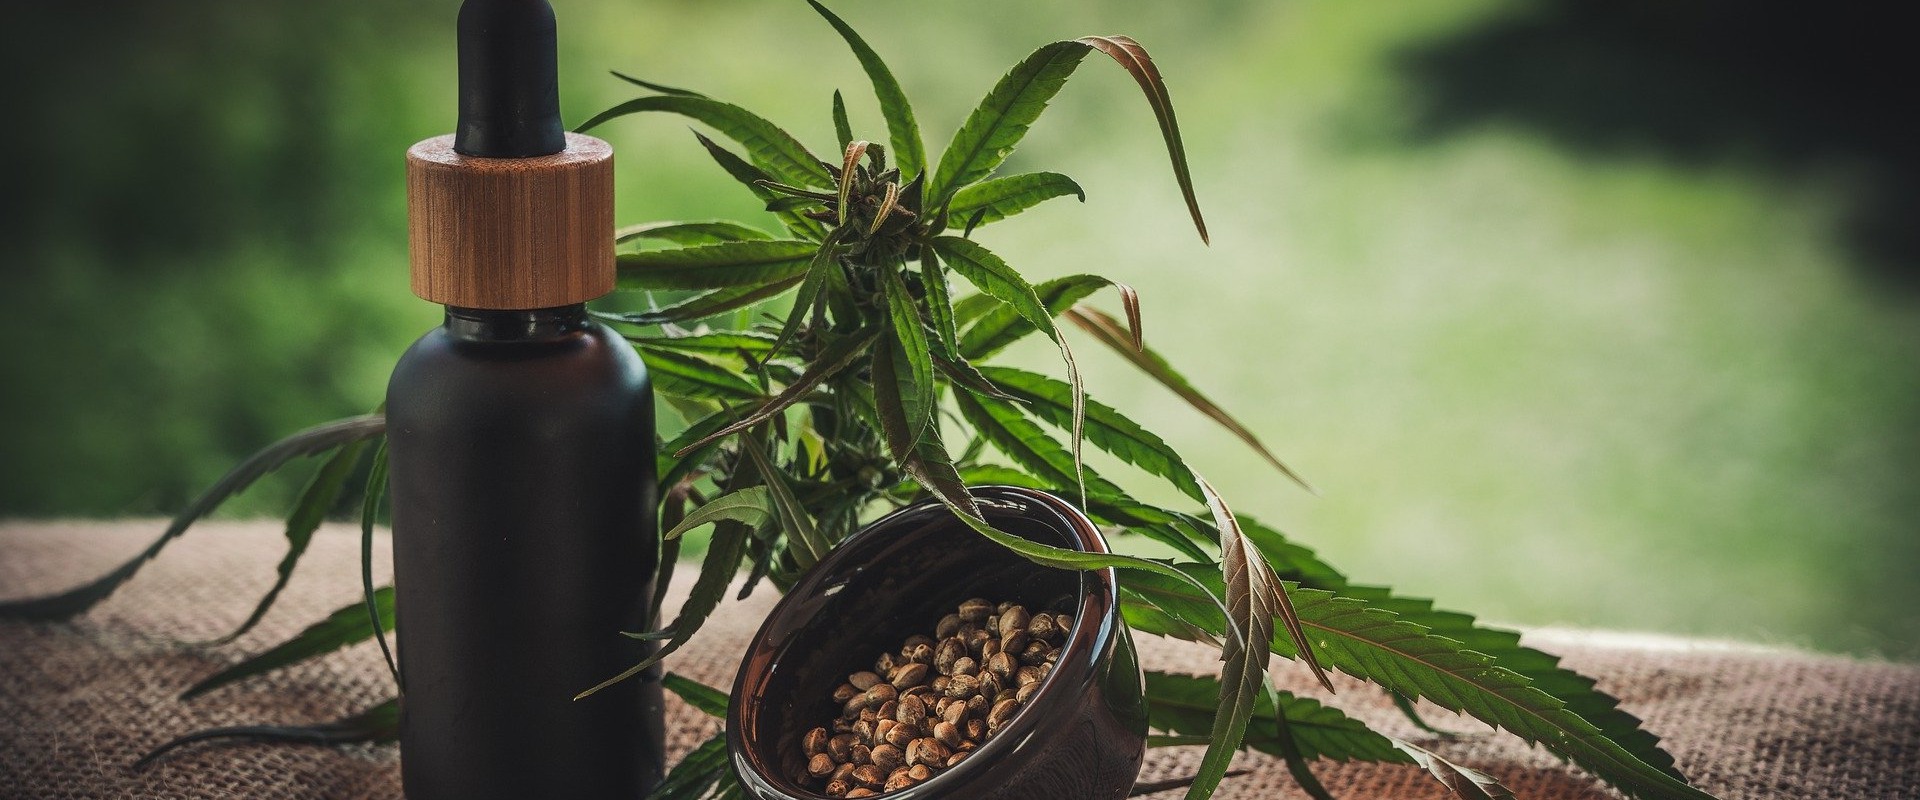 The Potential Benefits and Risks of CBD Oil for the Elderly